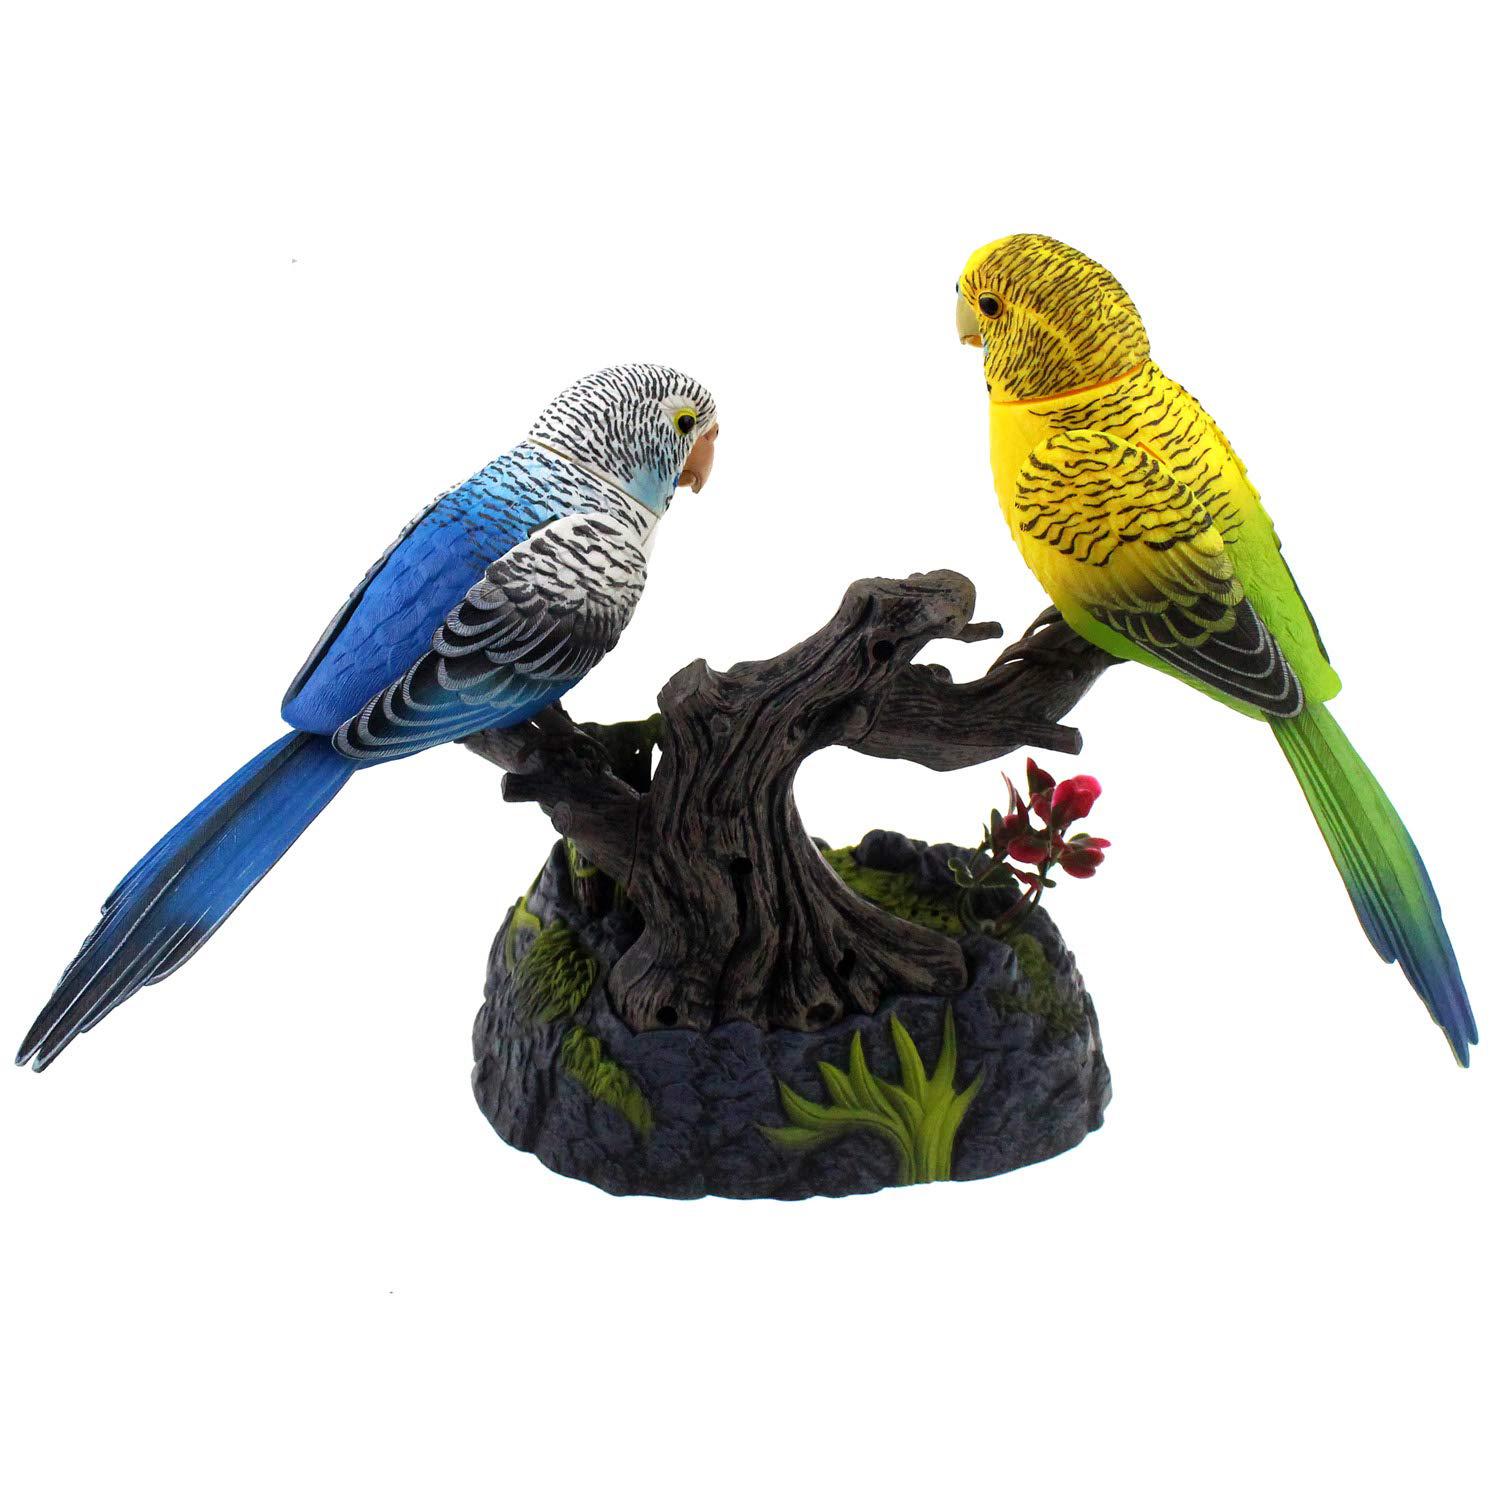 tipmant talking parrots birds electronic pets office home decoration recording & playback function pen holders kids toys chri